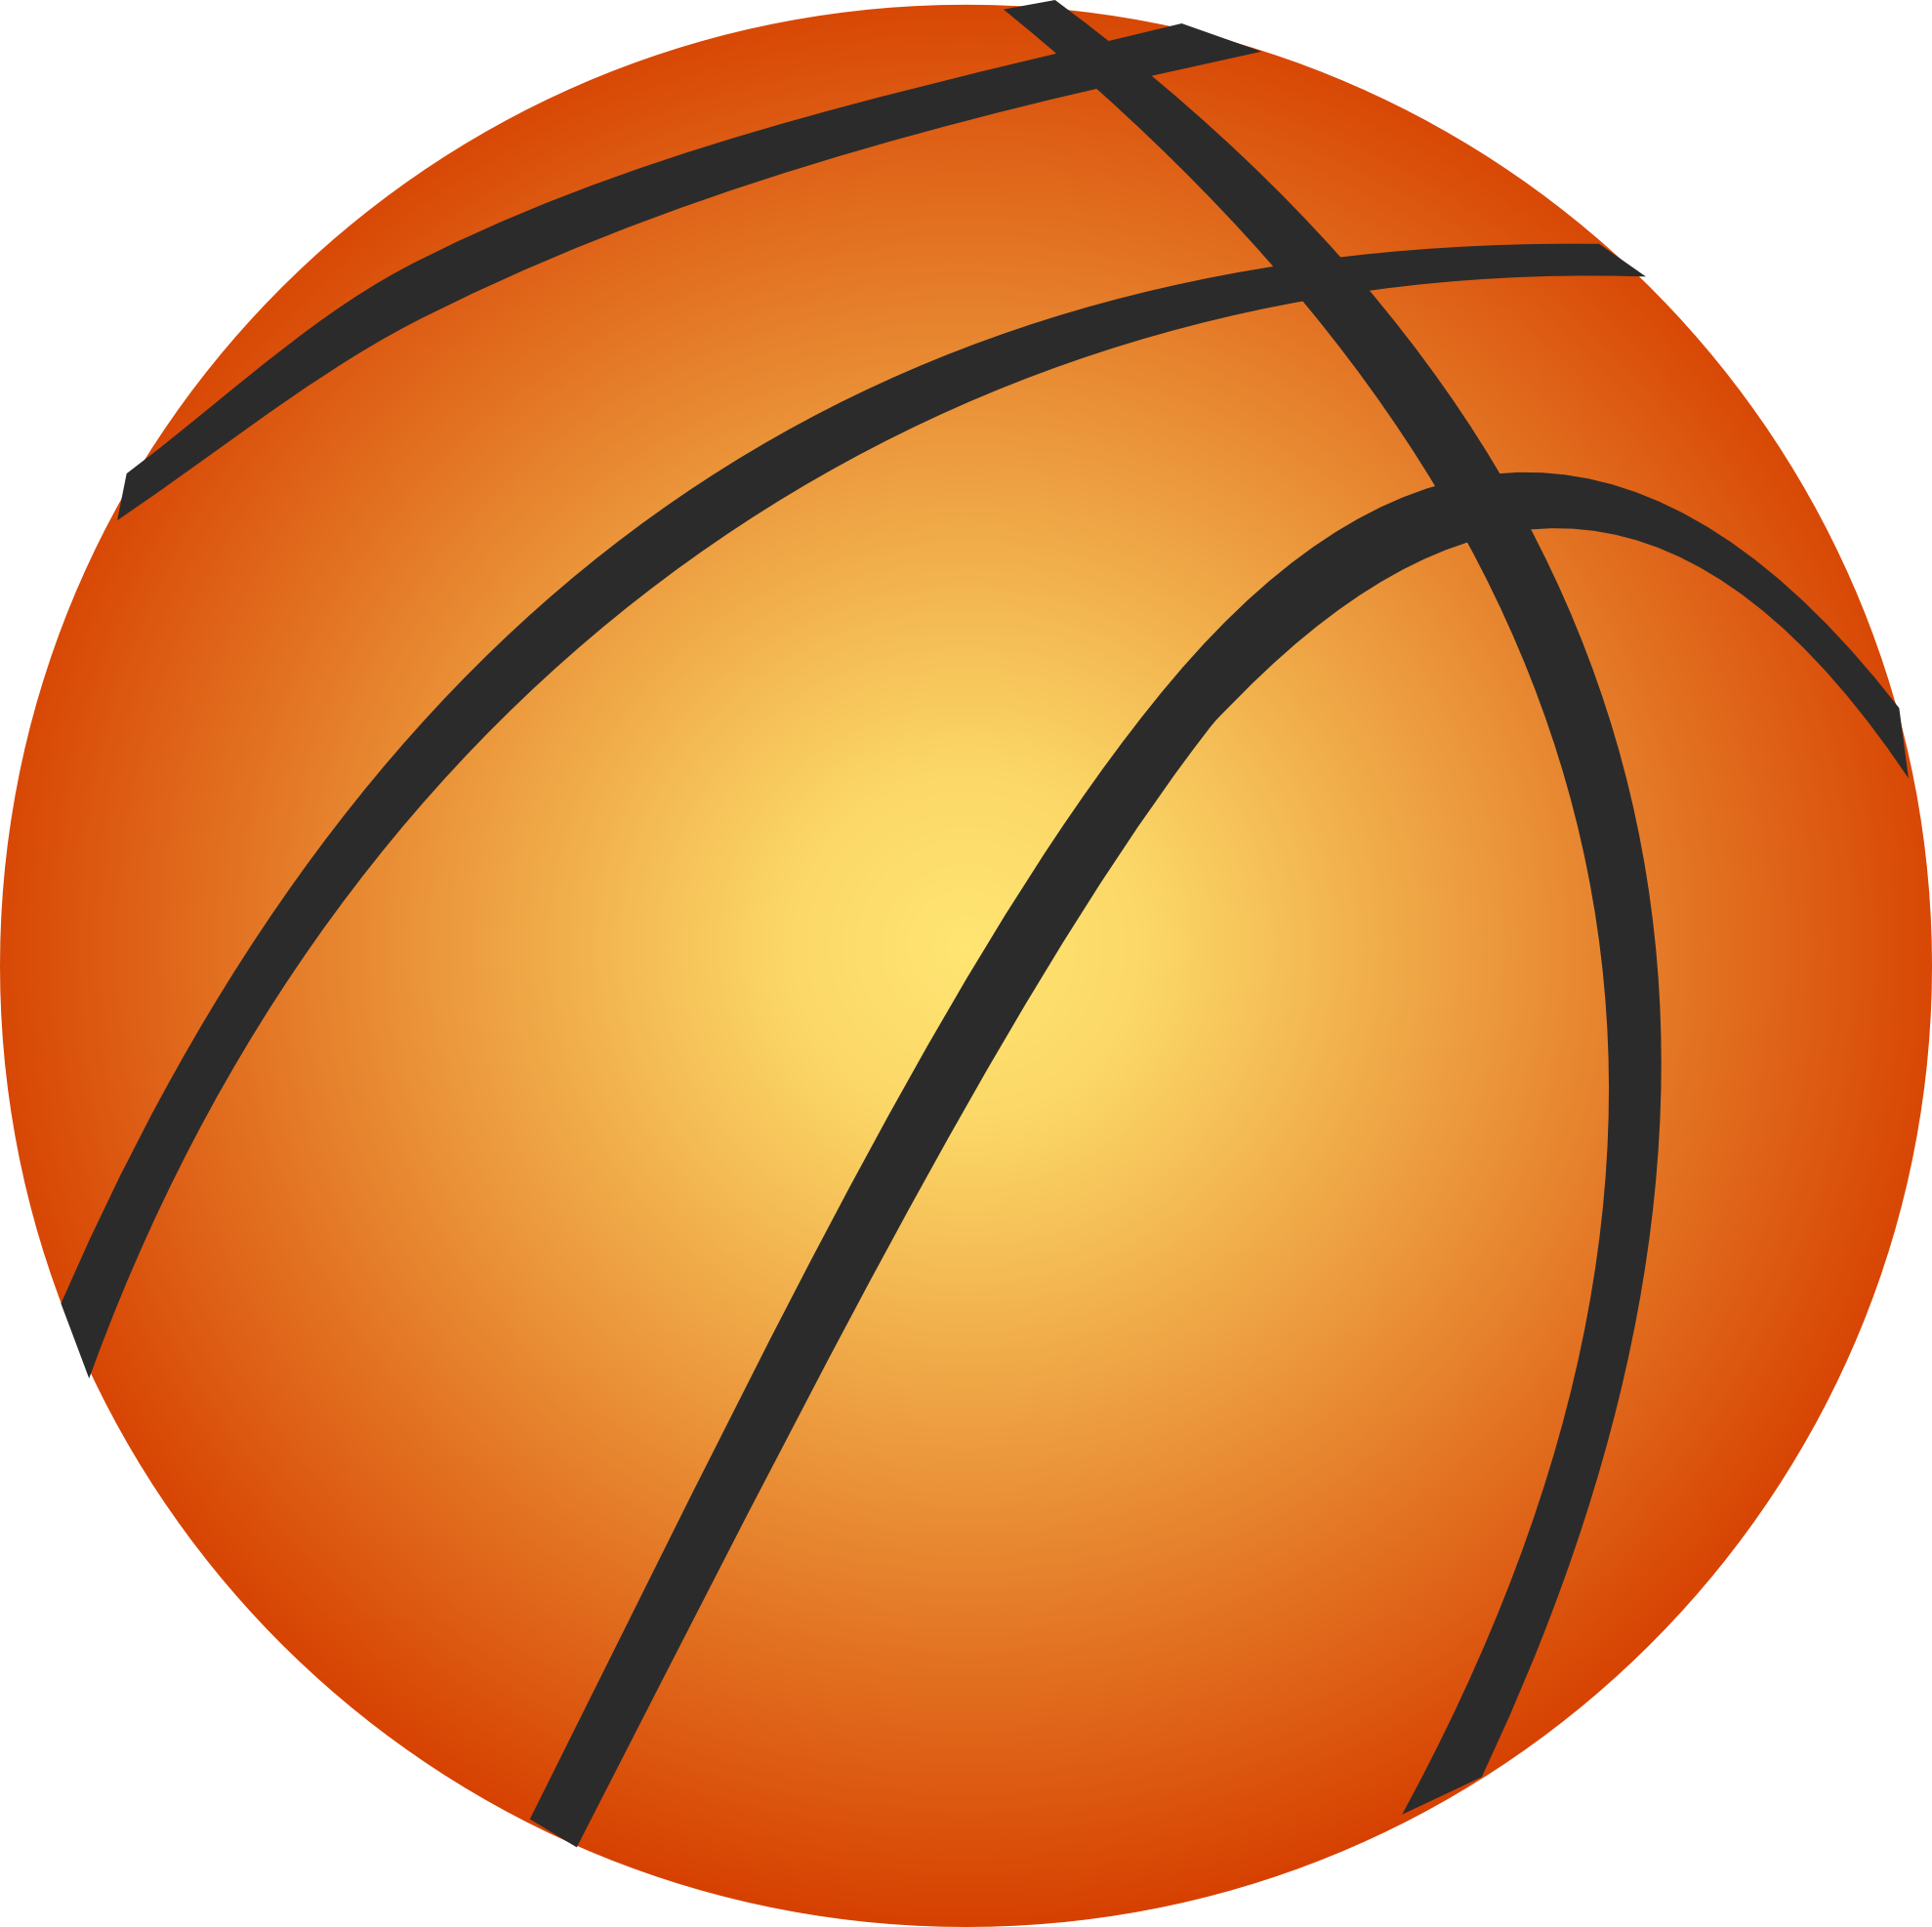 Clipart Of A Basketball - Clipart library